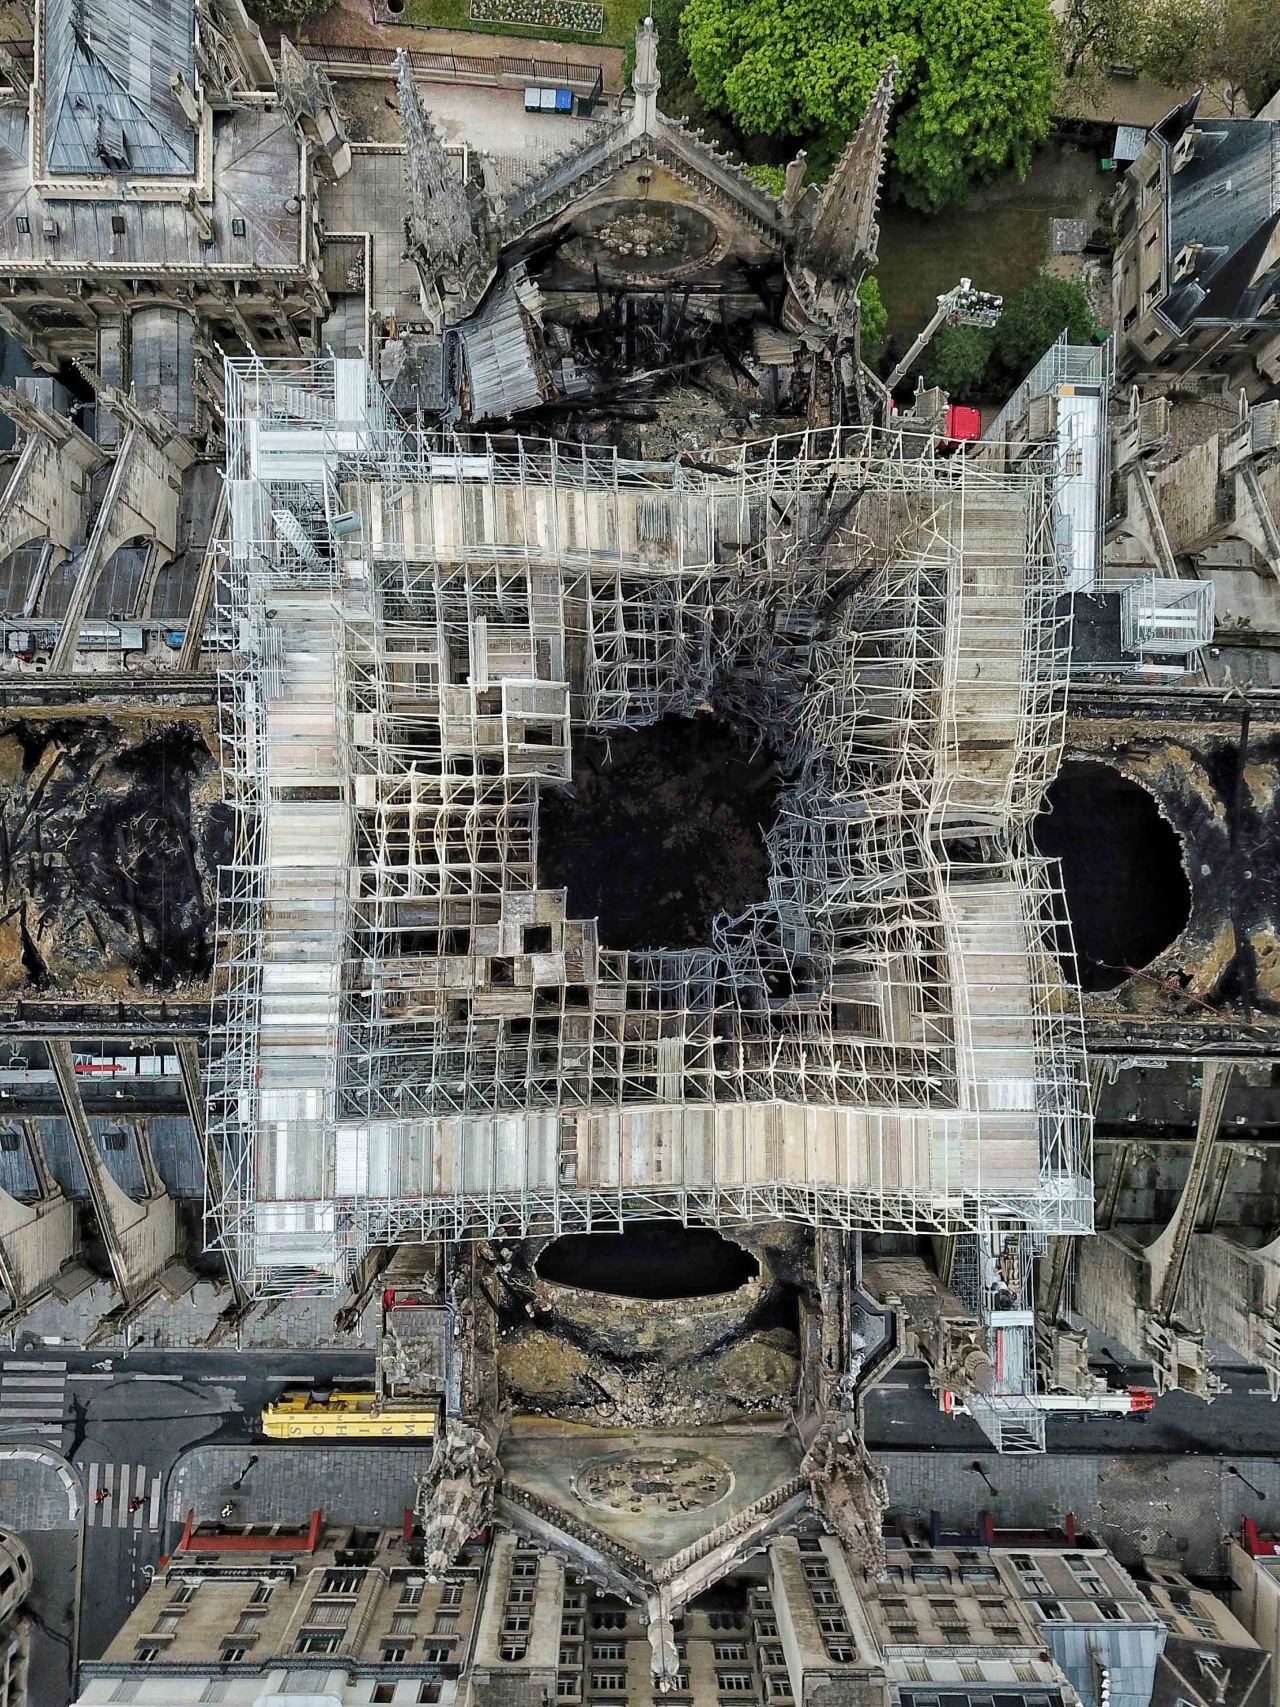 The impact of the spire's dramatic collapse is shown, with the scaffolding that held it upright twisted and tangled out of shape.